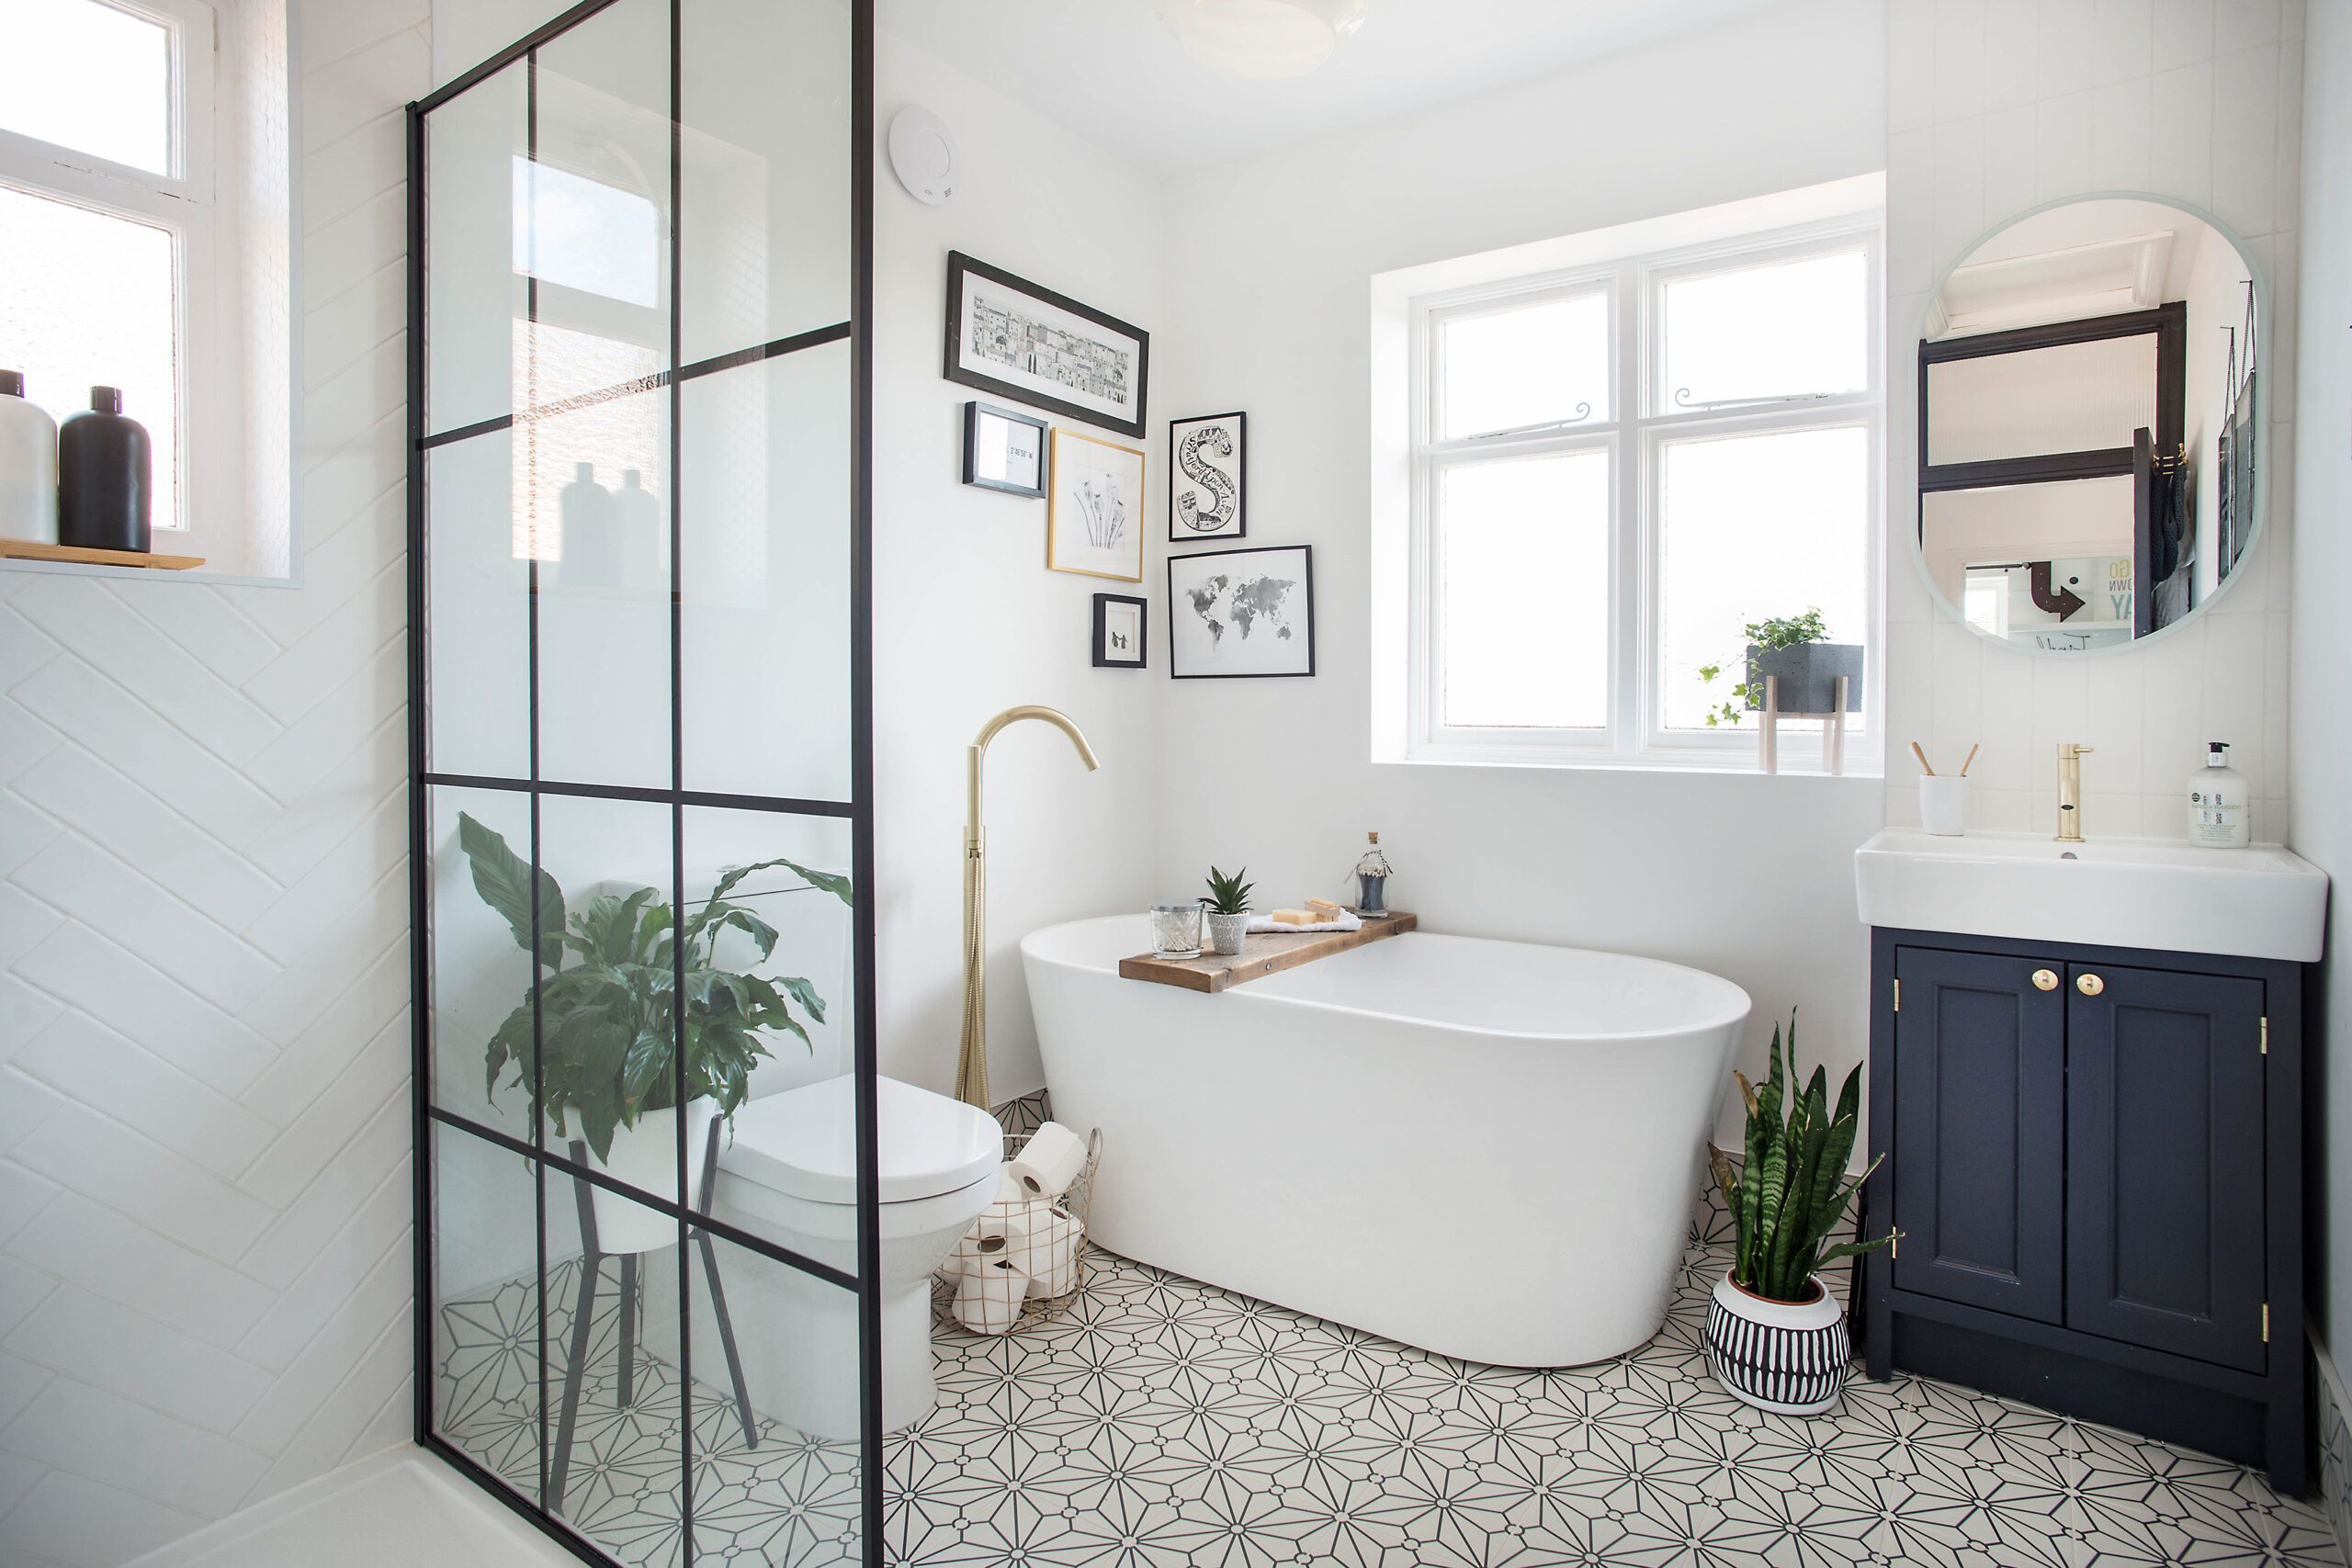 Budget-Friendly Bathroom Tile Ideas That Look Expensive